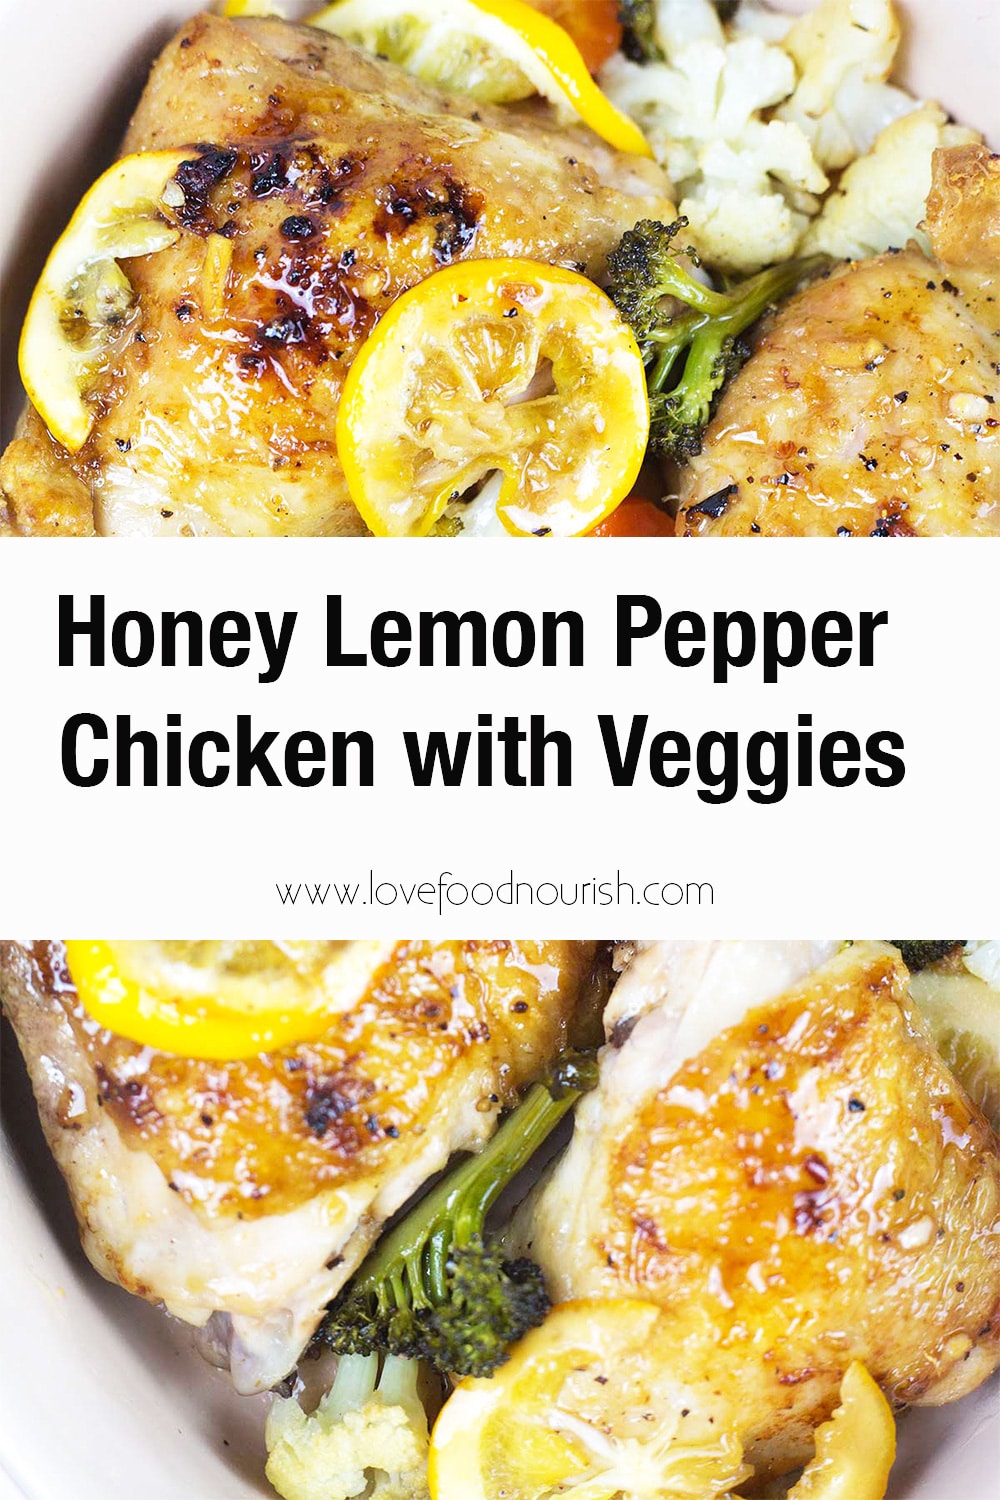 Baked honey honey pepper chicken, close up of chicken and vegetables with text overlay.